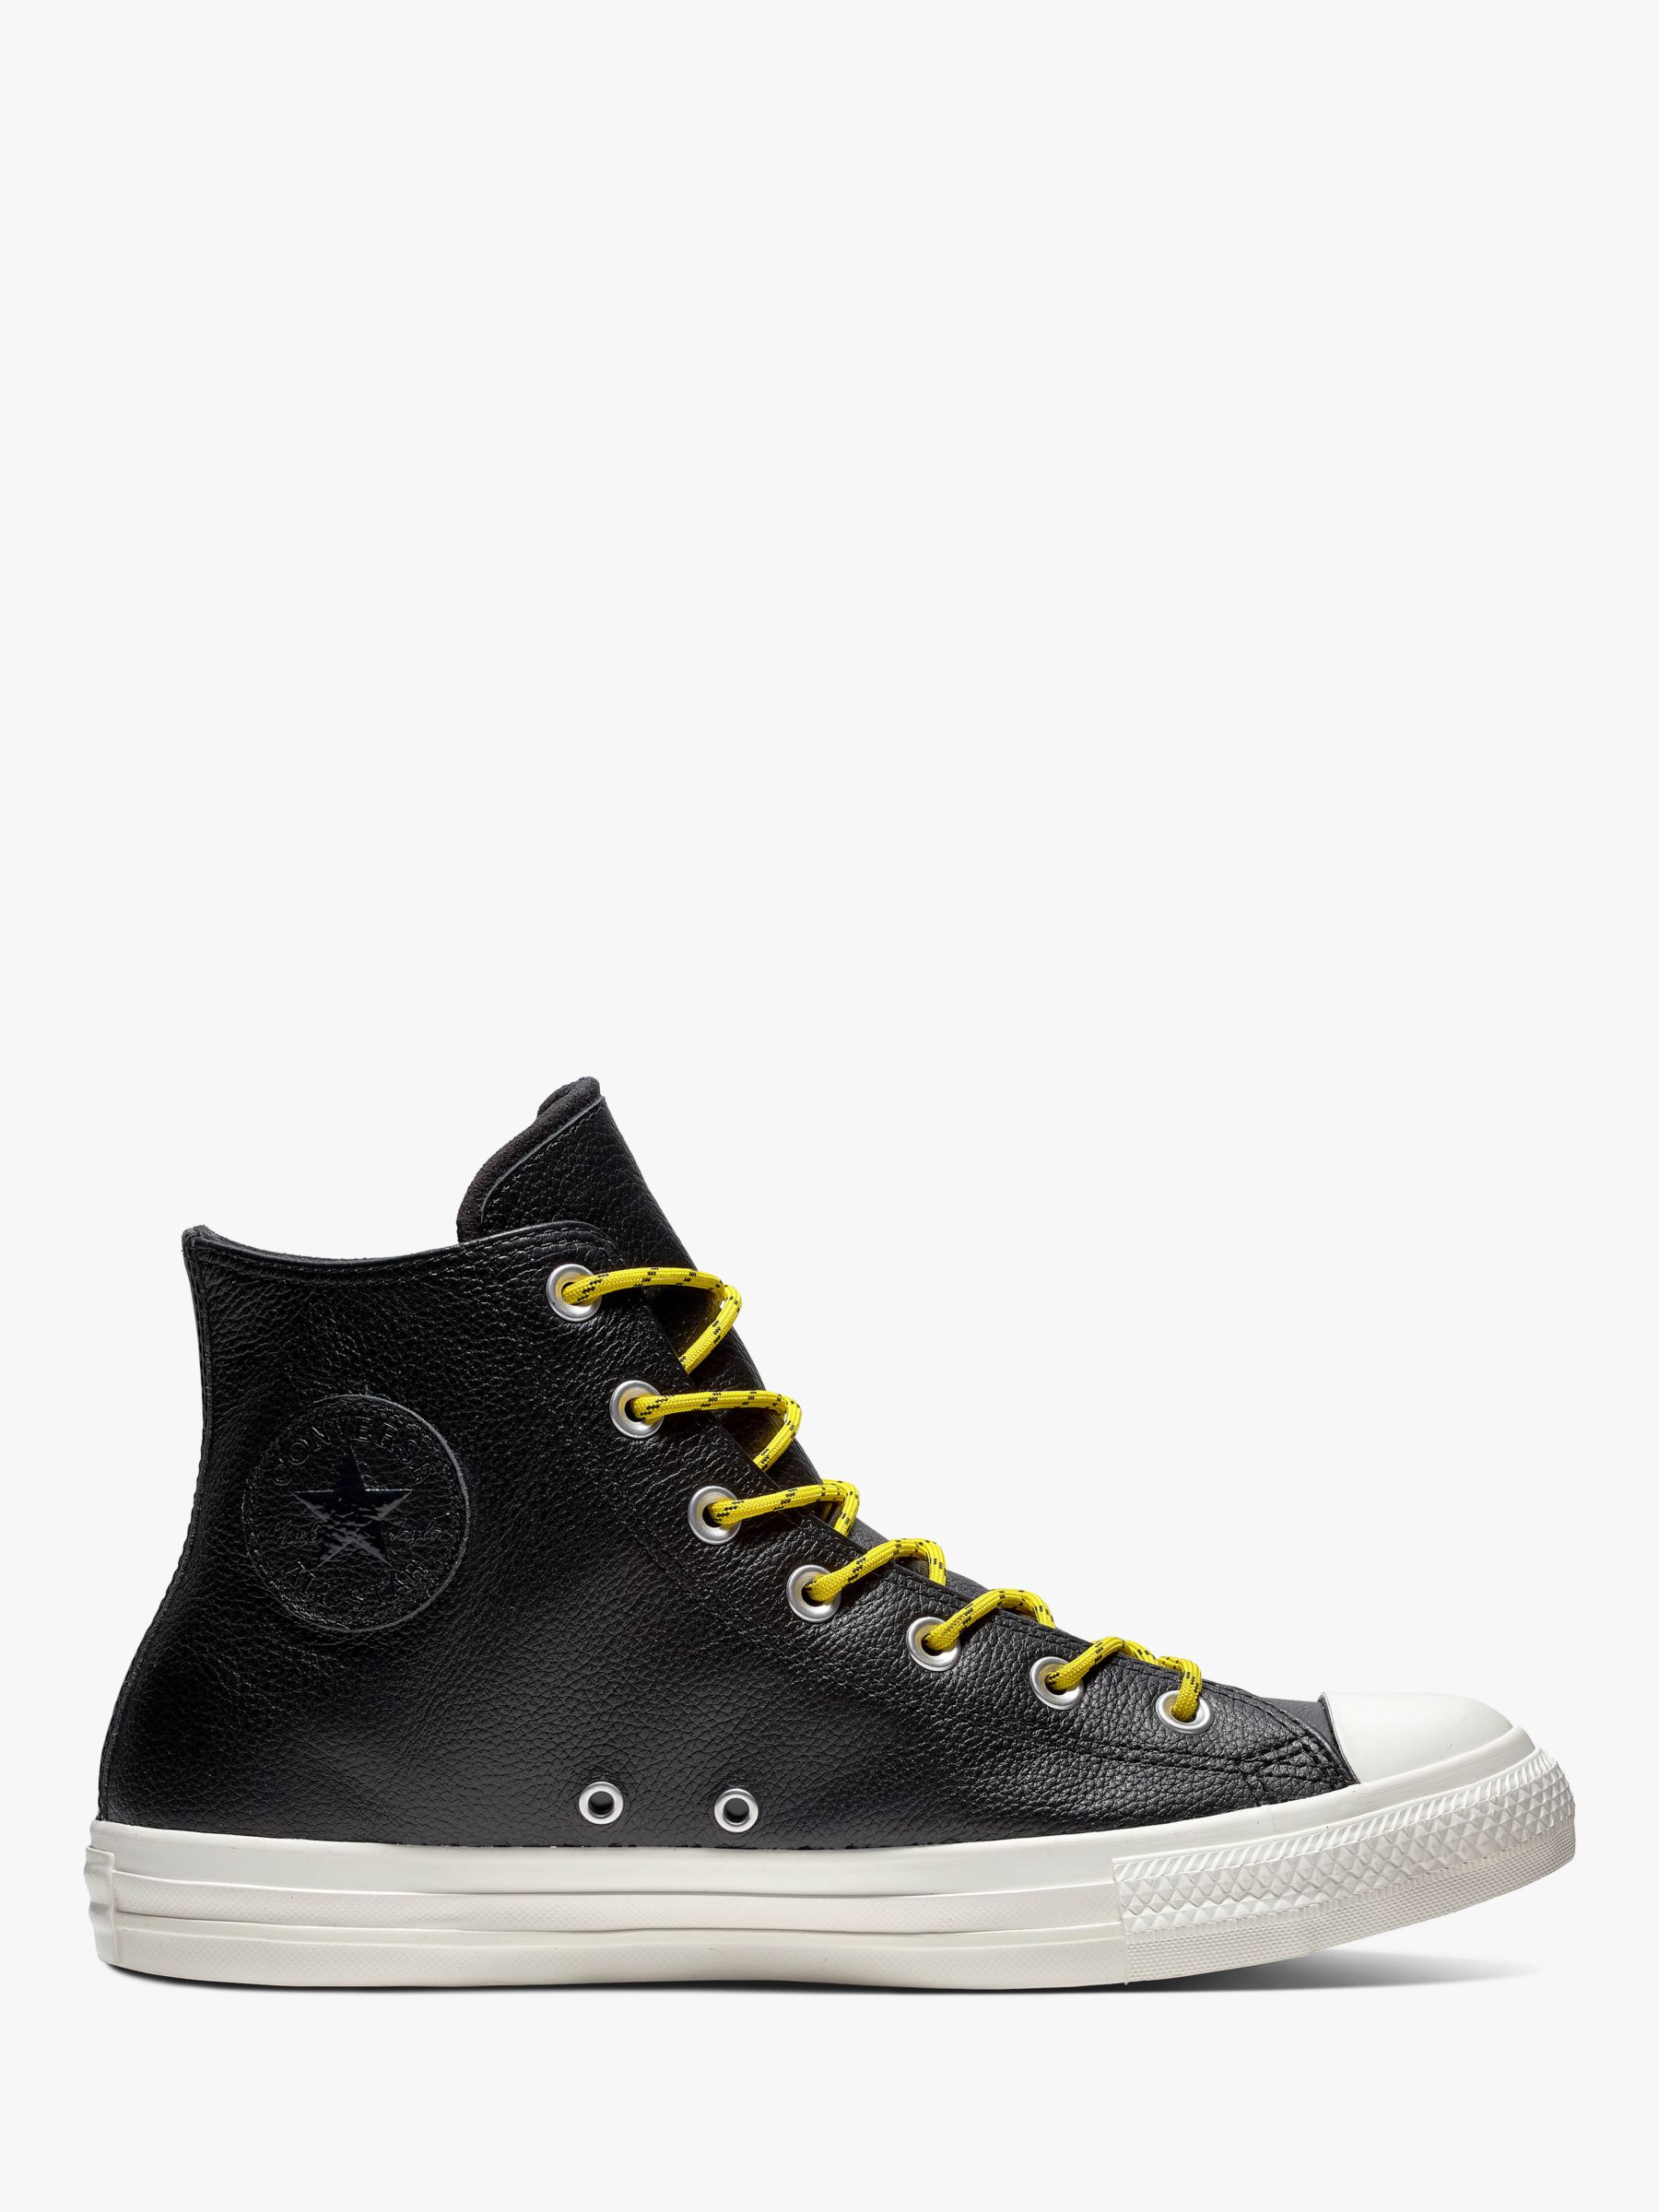 converse chuck taylor leather mens